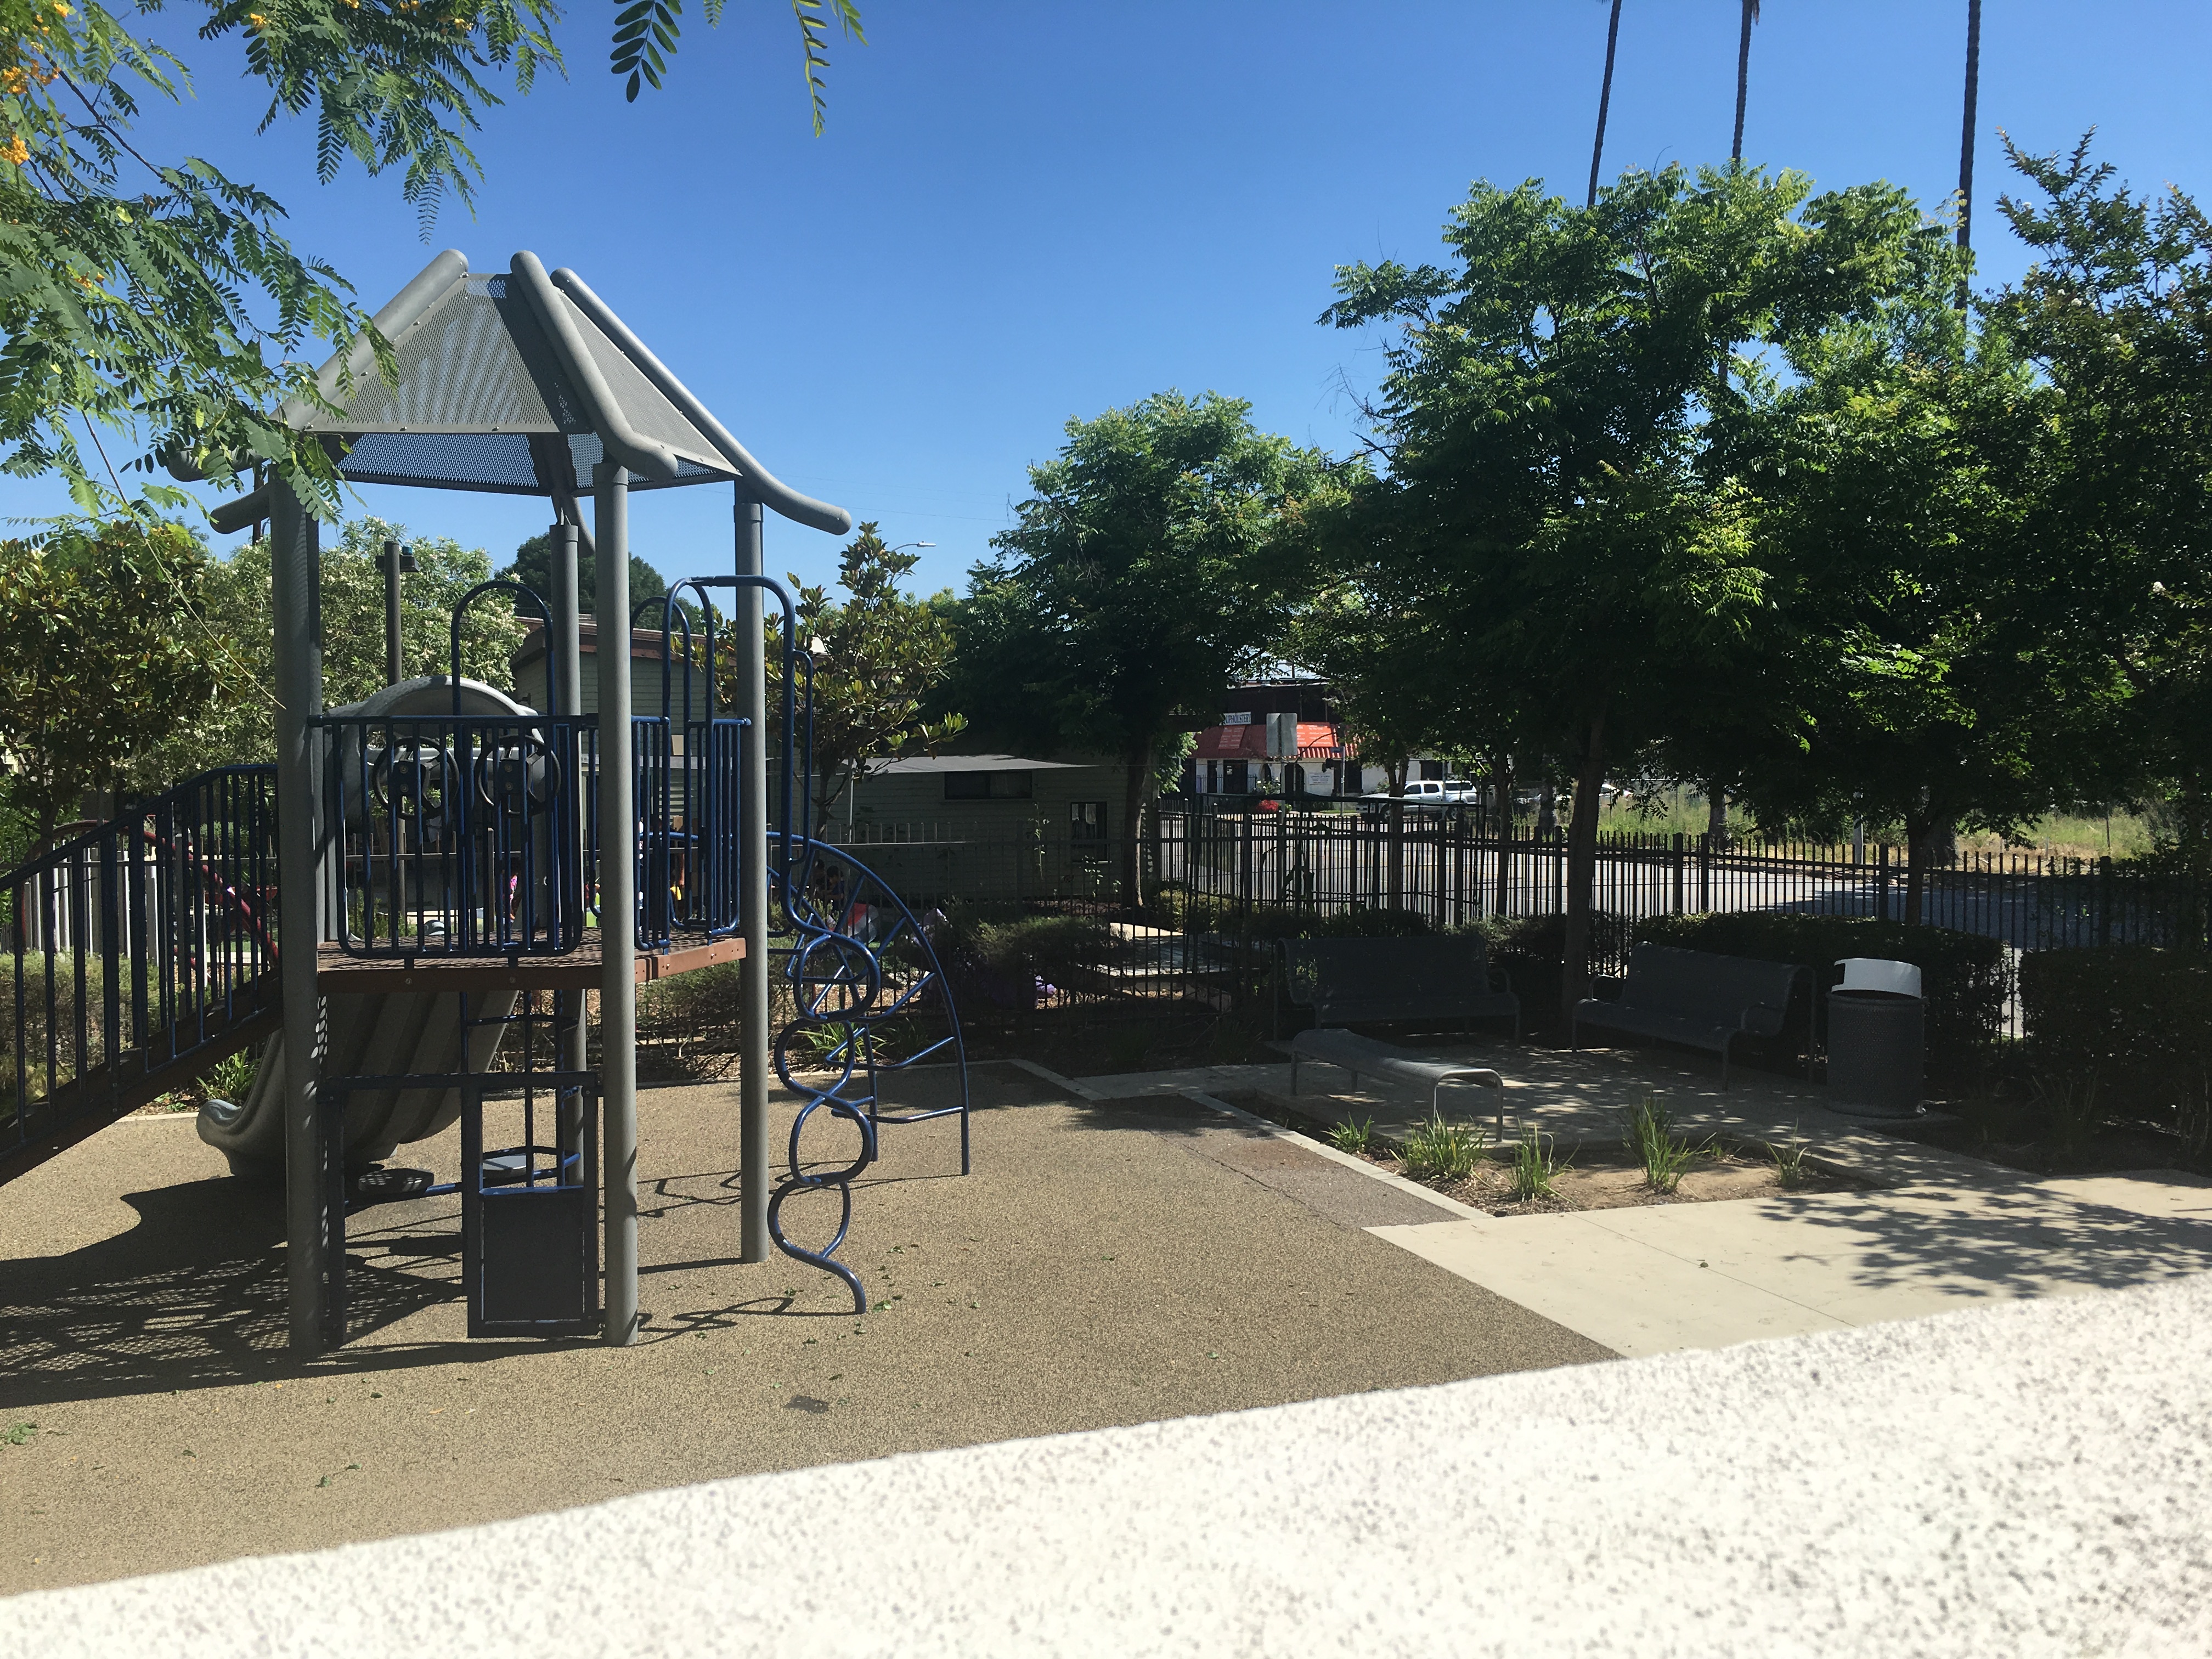 View of a gated playground, benches and trees all around.